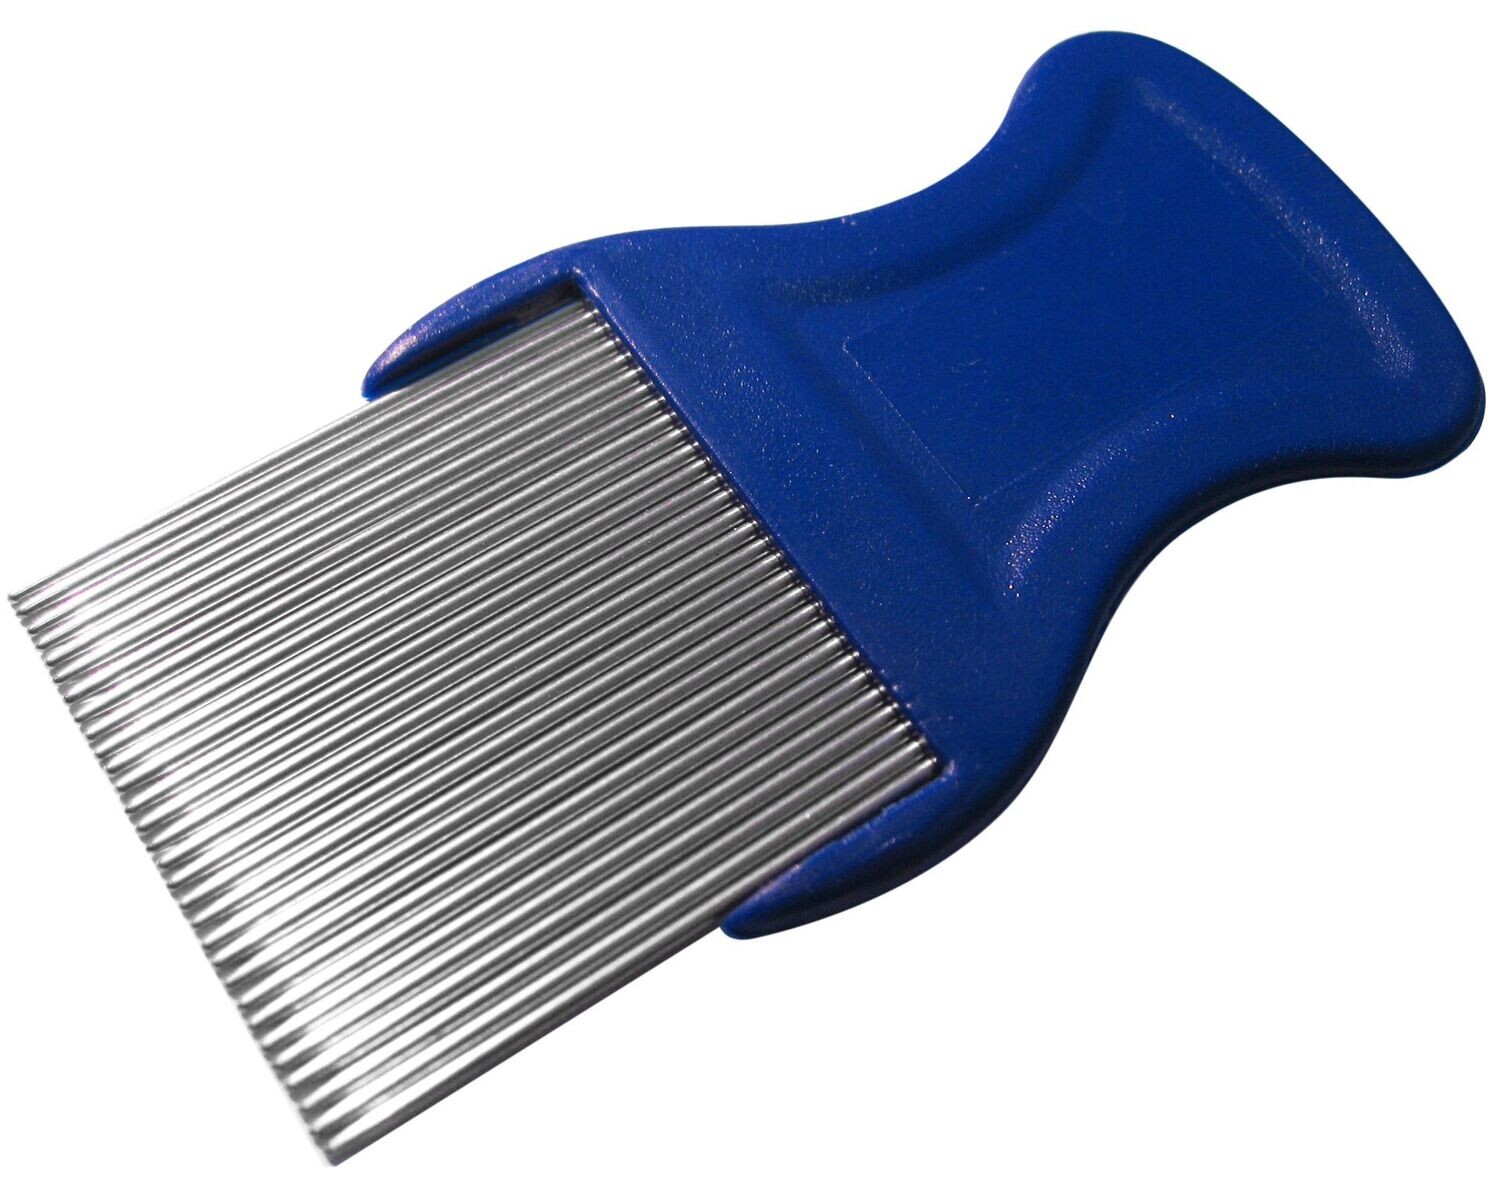 Long Tooth Metal Lice & Removal Comb - Item # 366